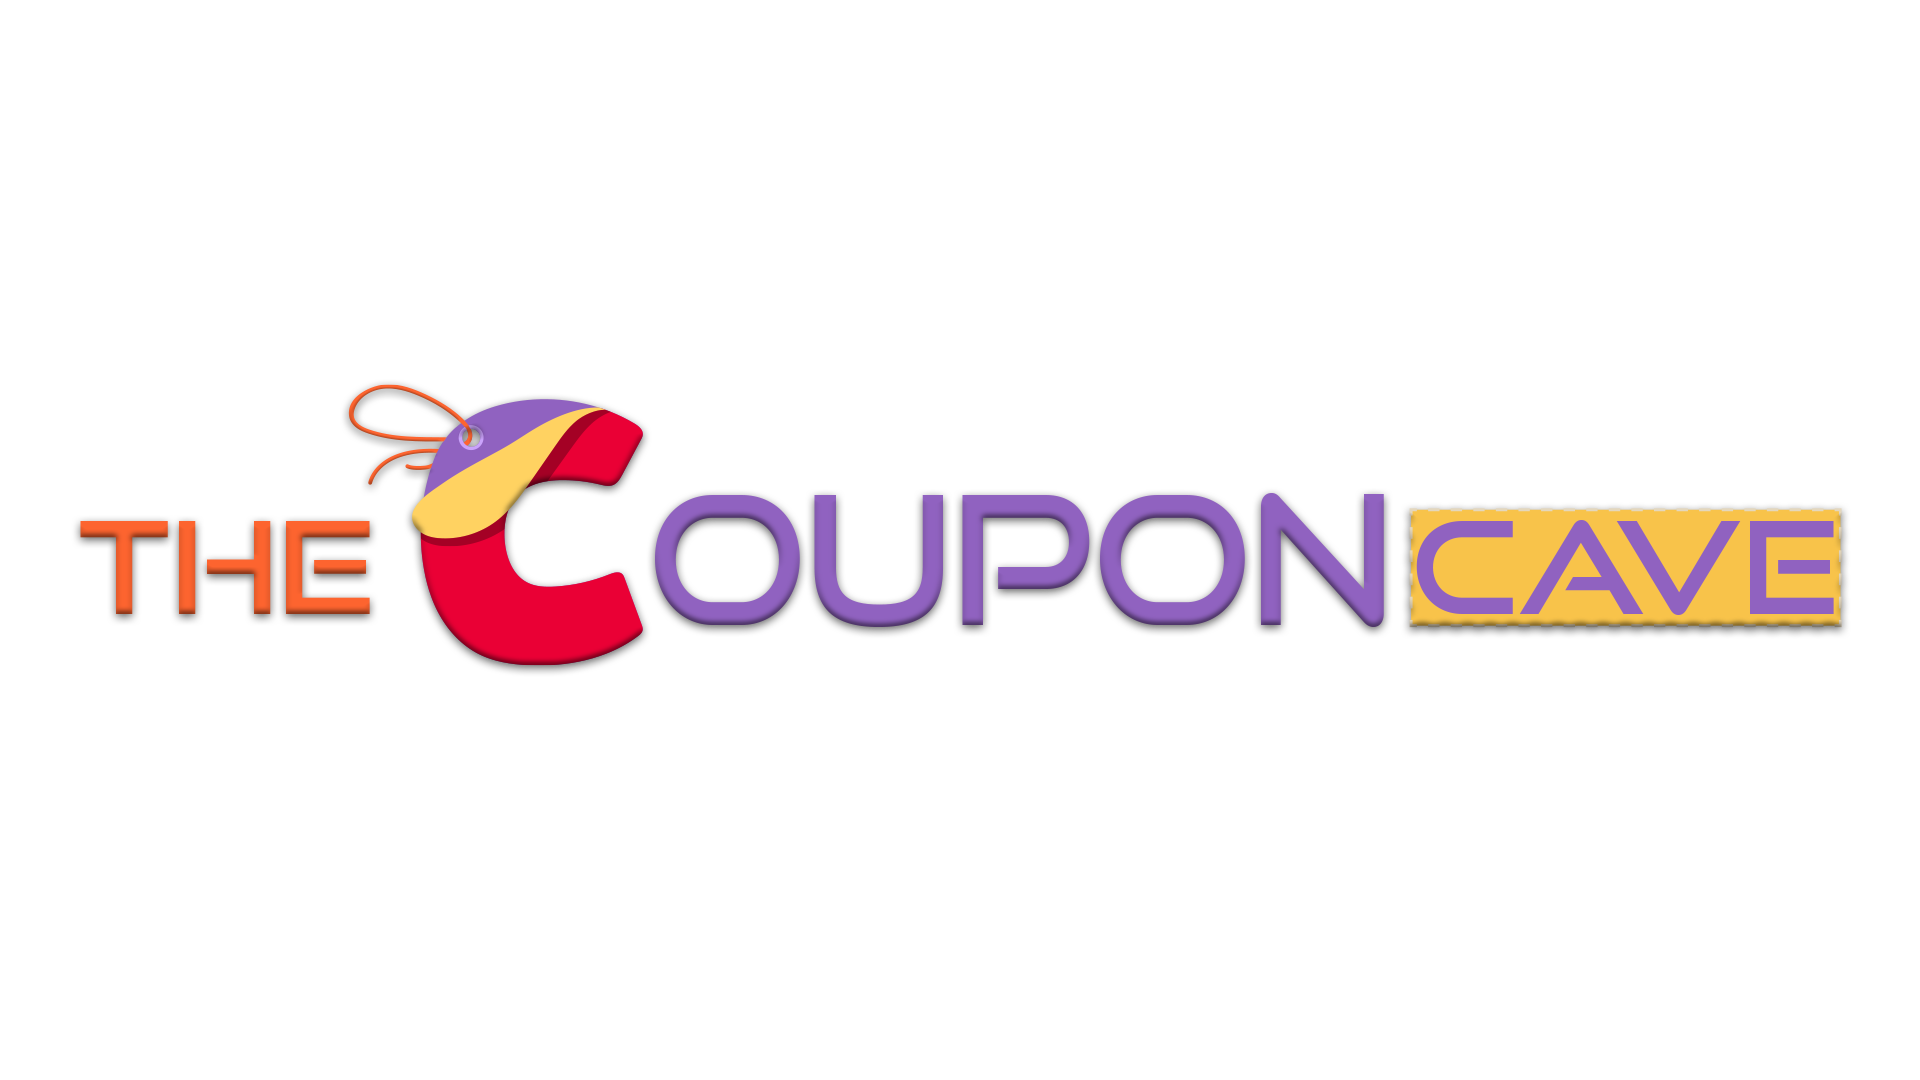 The Coupon Cave